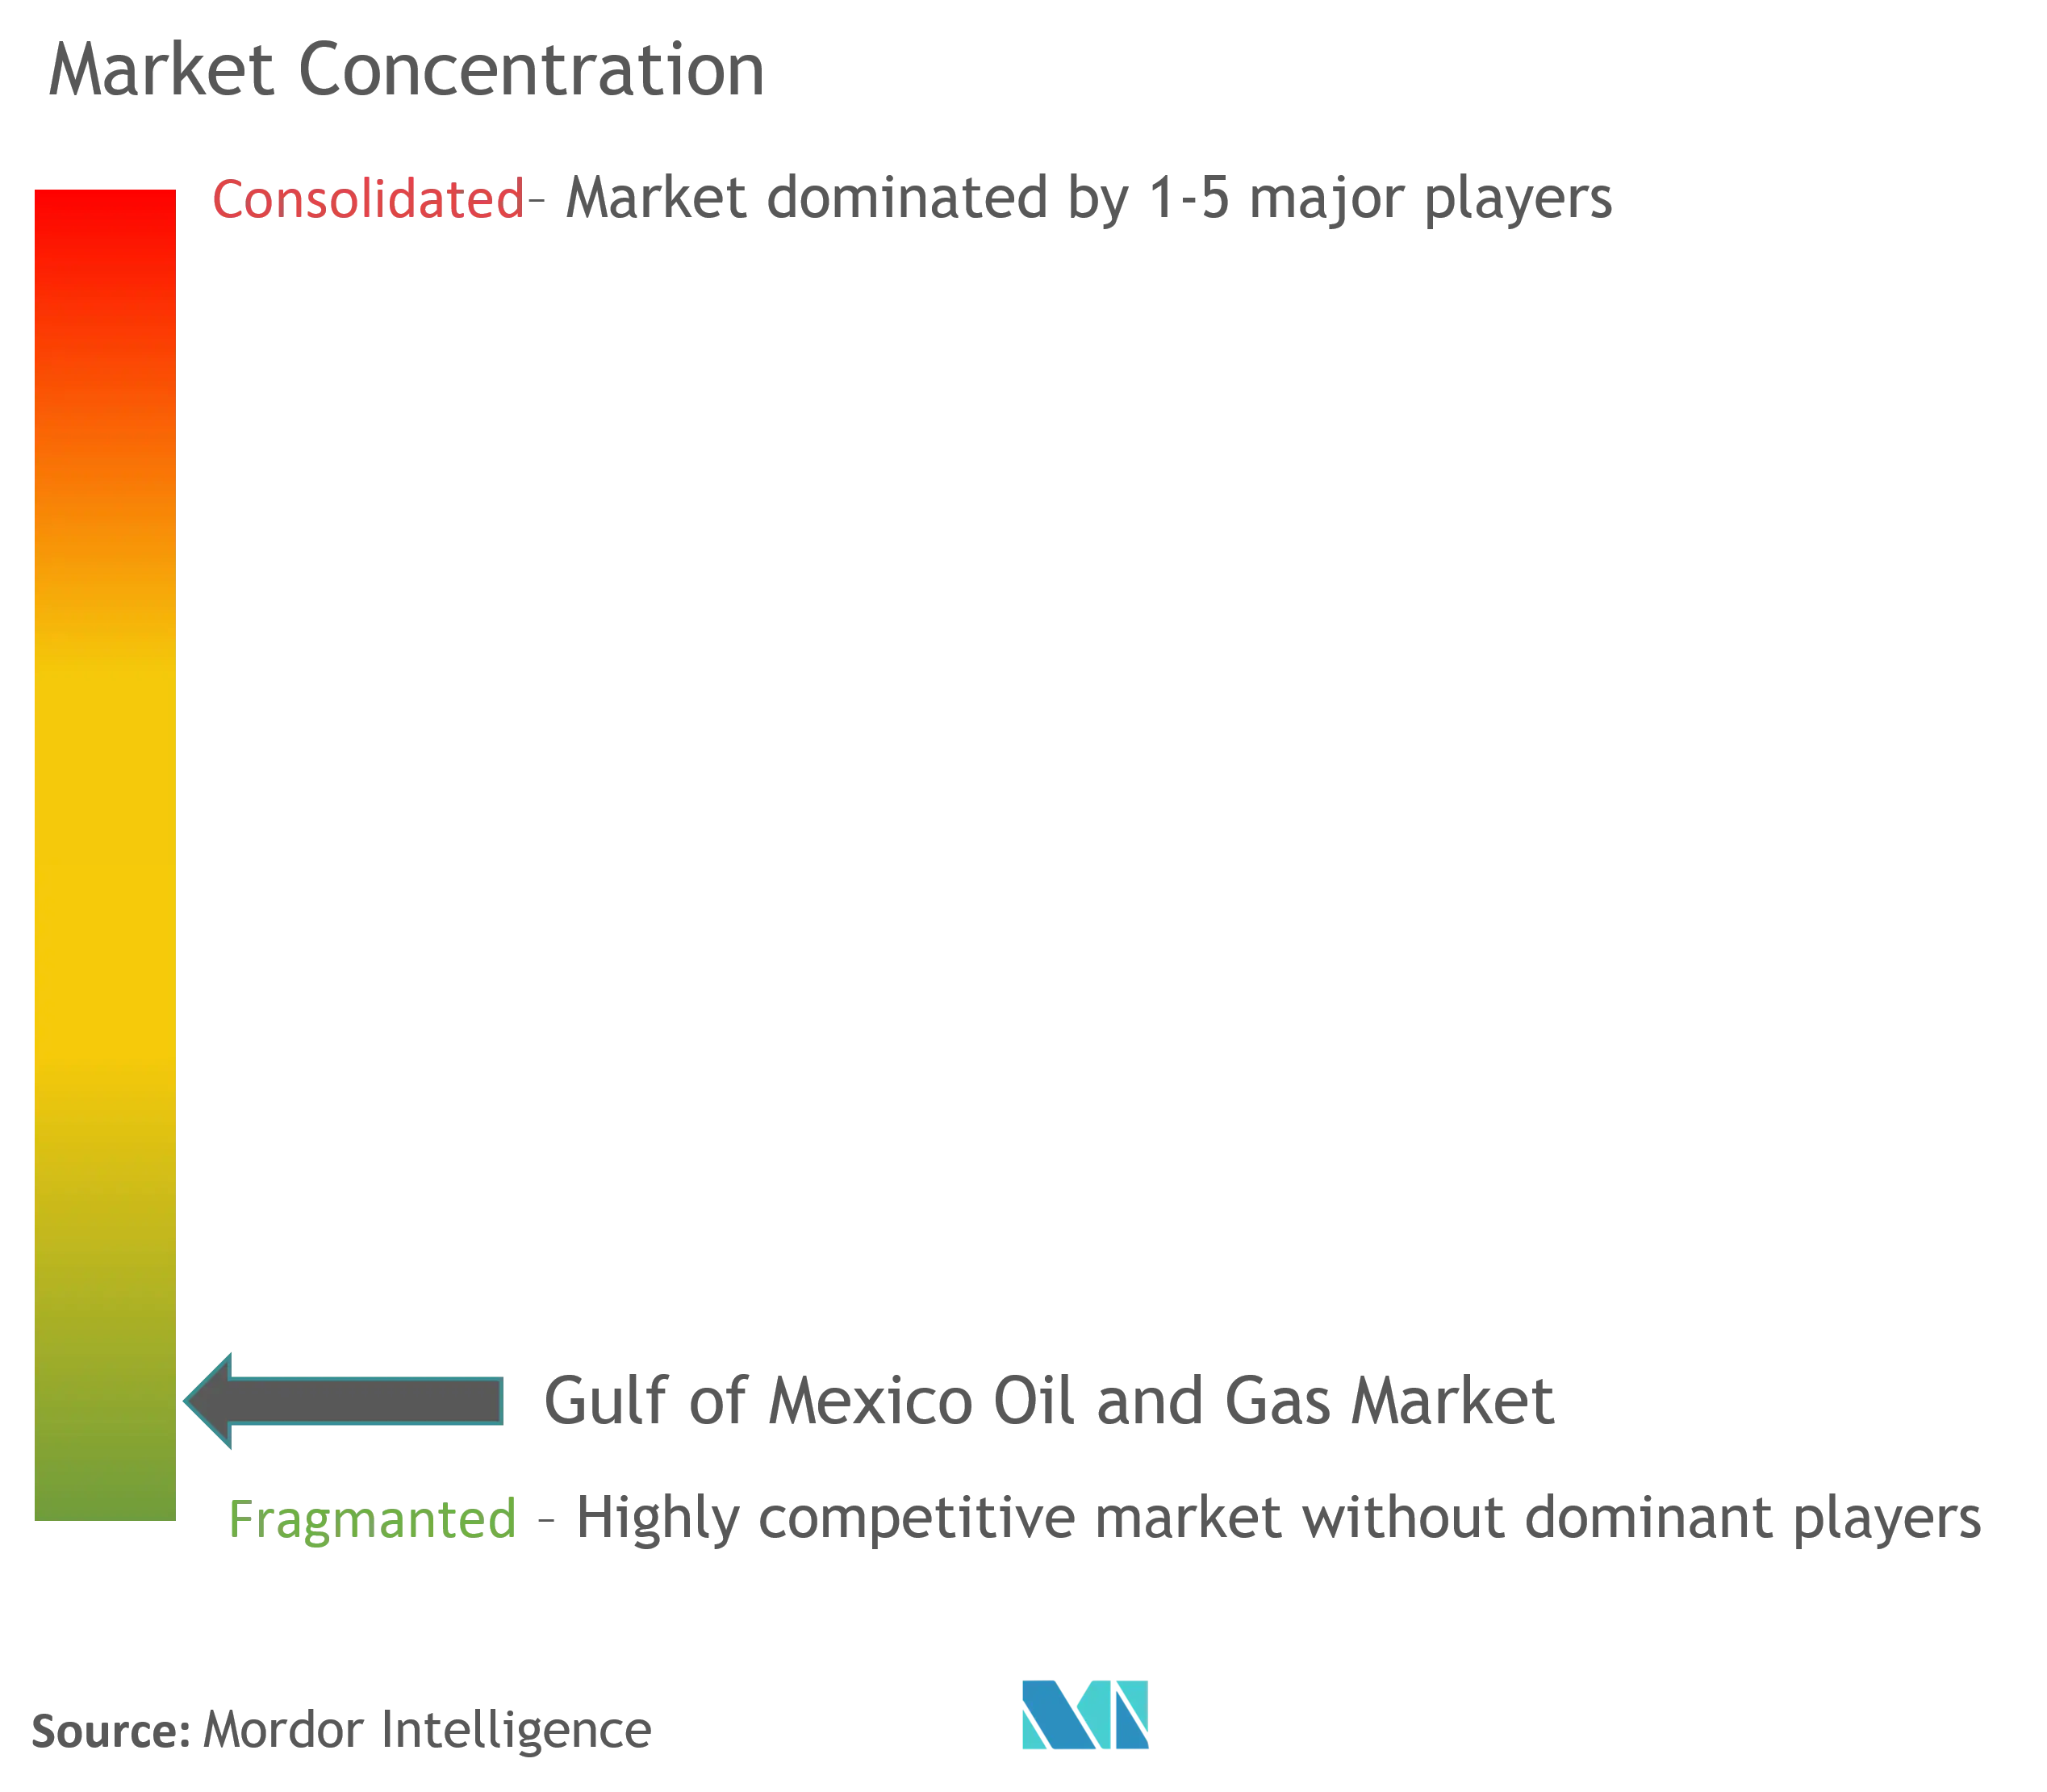 Gulf Of Mexico Oil And Gas Market Concentration